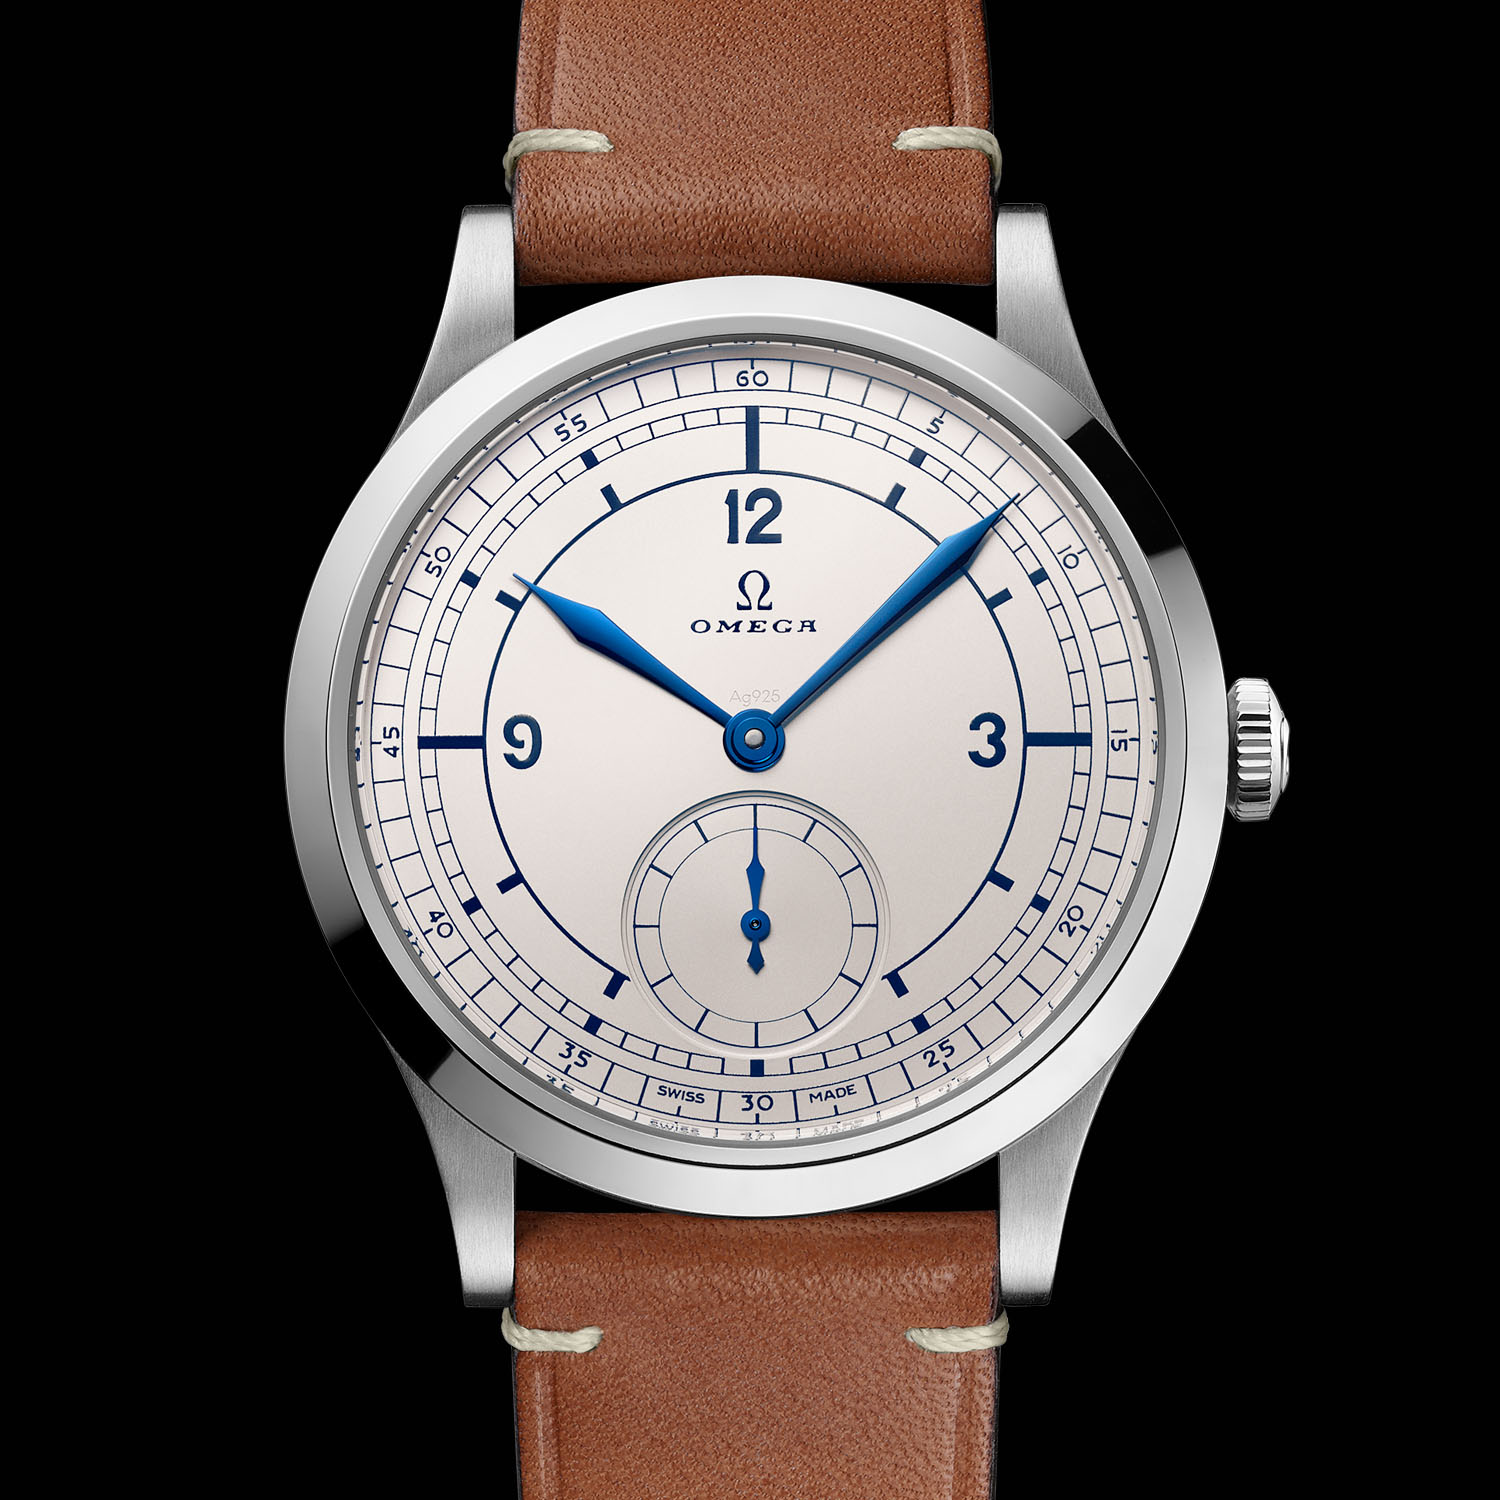 Introducing – The New Sector Dial Omega CK 859 Re-Edition Is Totally  Unexpected, Yet Totally Desirable - WATCHLOUNGE